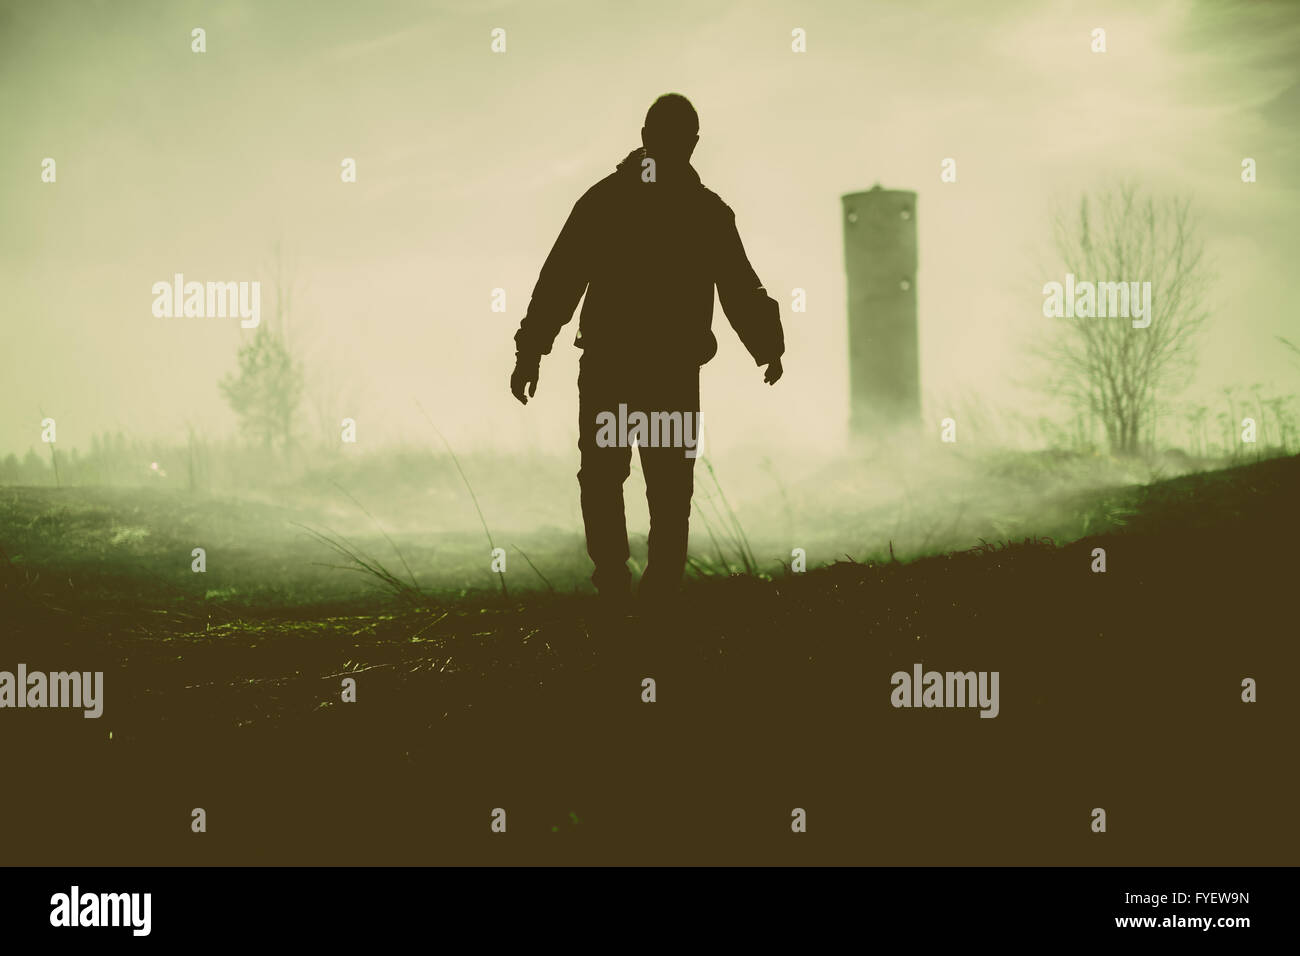 Silhouette of the walking person and tower. Stock Photo